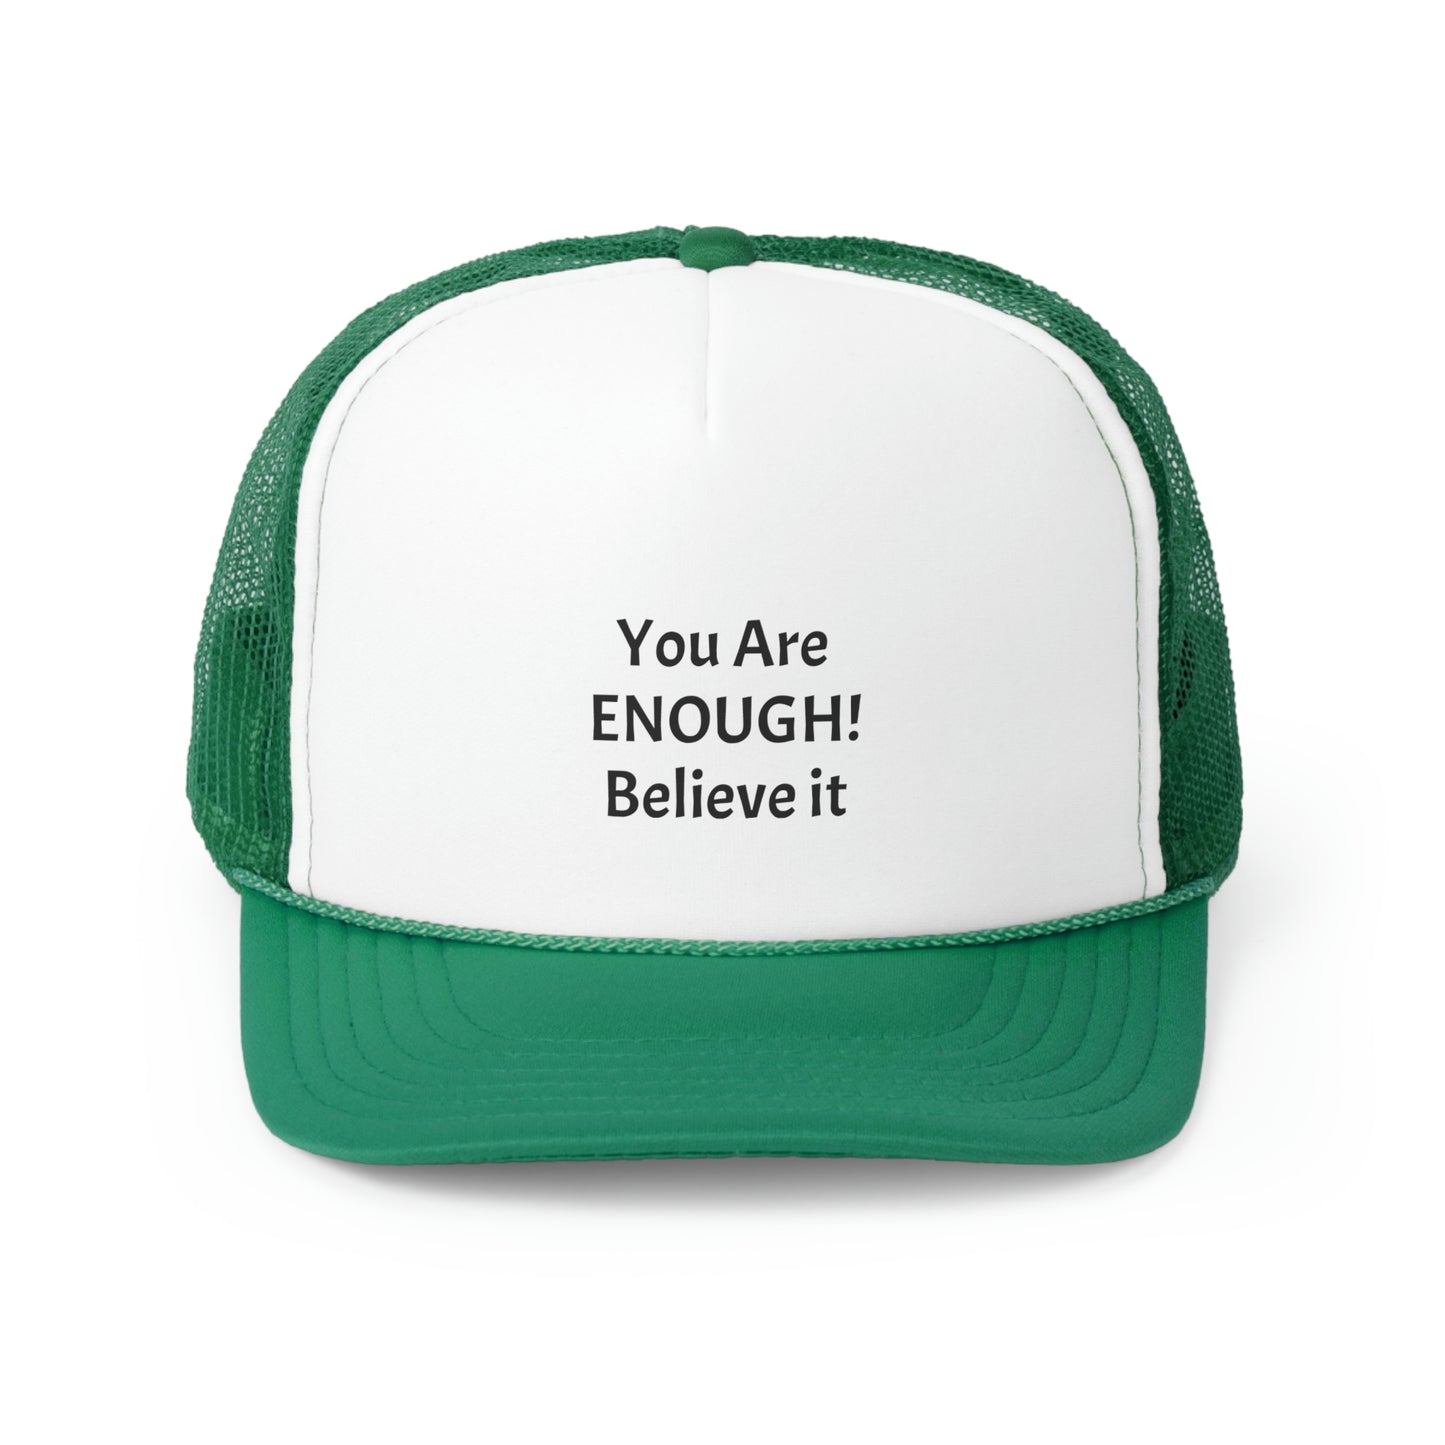 You Are Enough! Trucker Caps